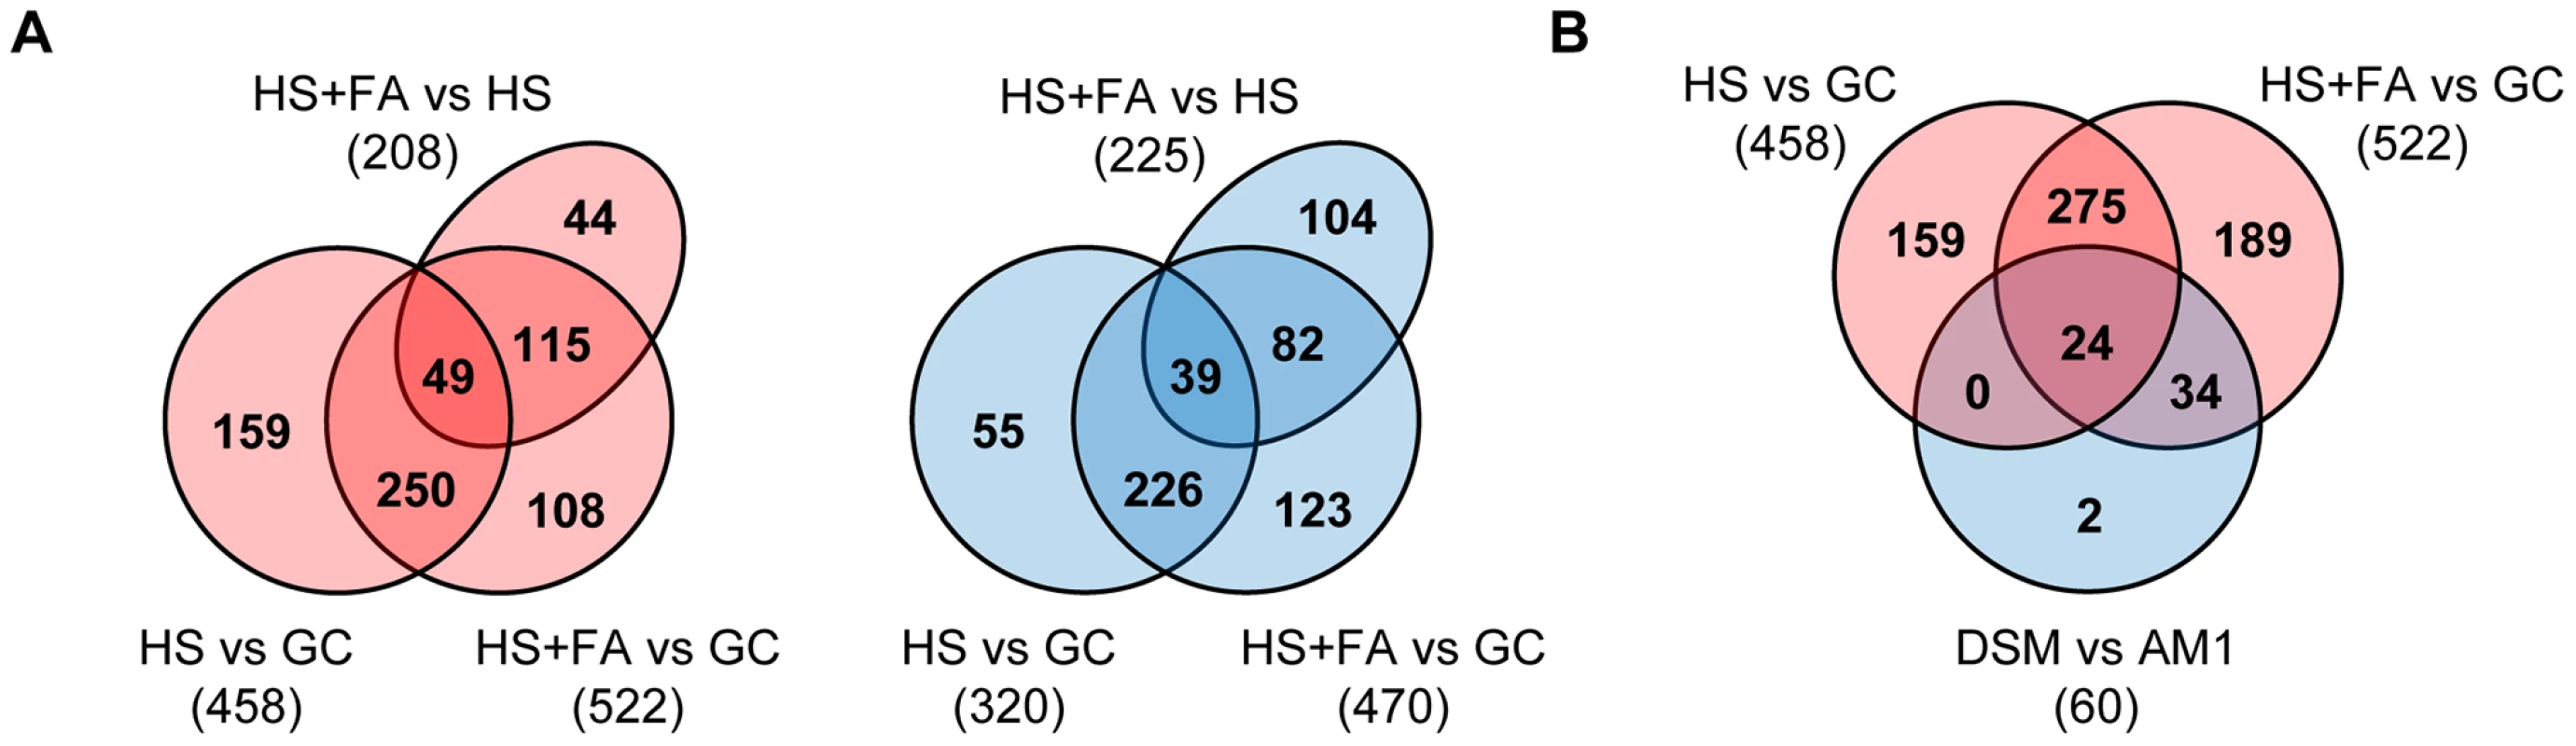 Venn diagram illustrating overlaps between numbers of genes that are differentially regulated in response to plant surface-cues.